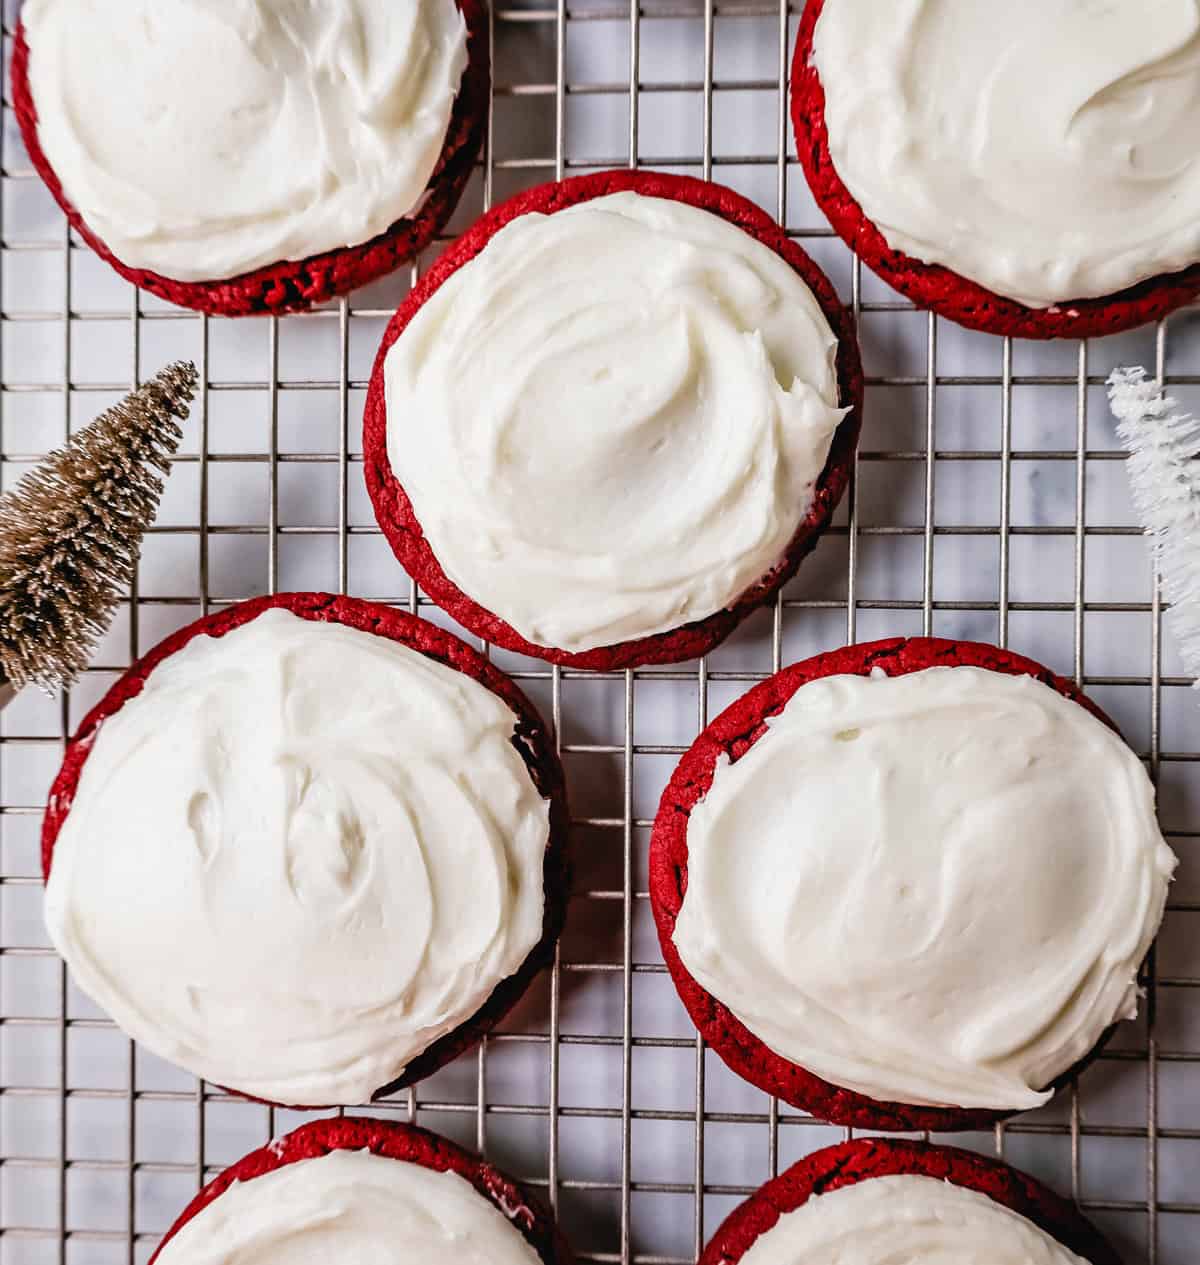 Soft, chewy homemade red velvet cookies topped with a sweet cream cheese frosting. A festive and delicious Christmas cookie recipe!